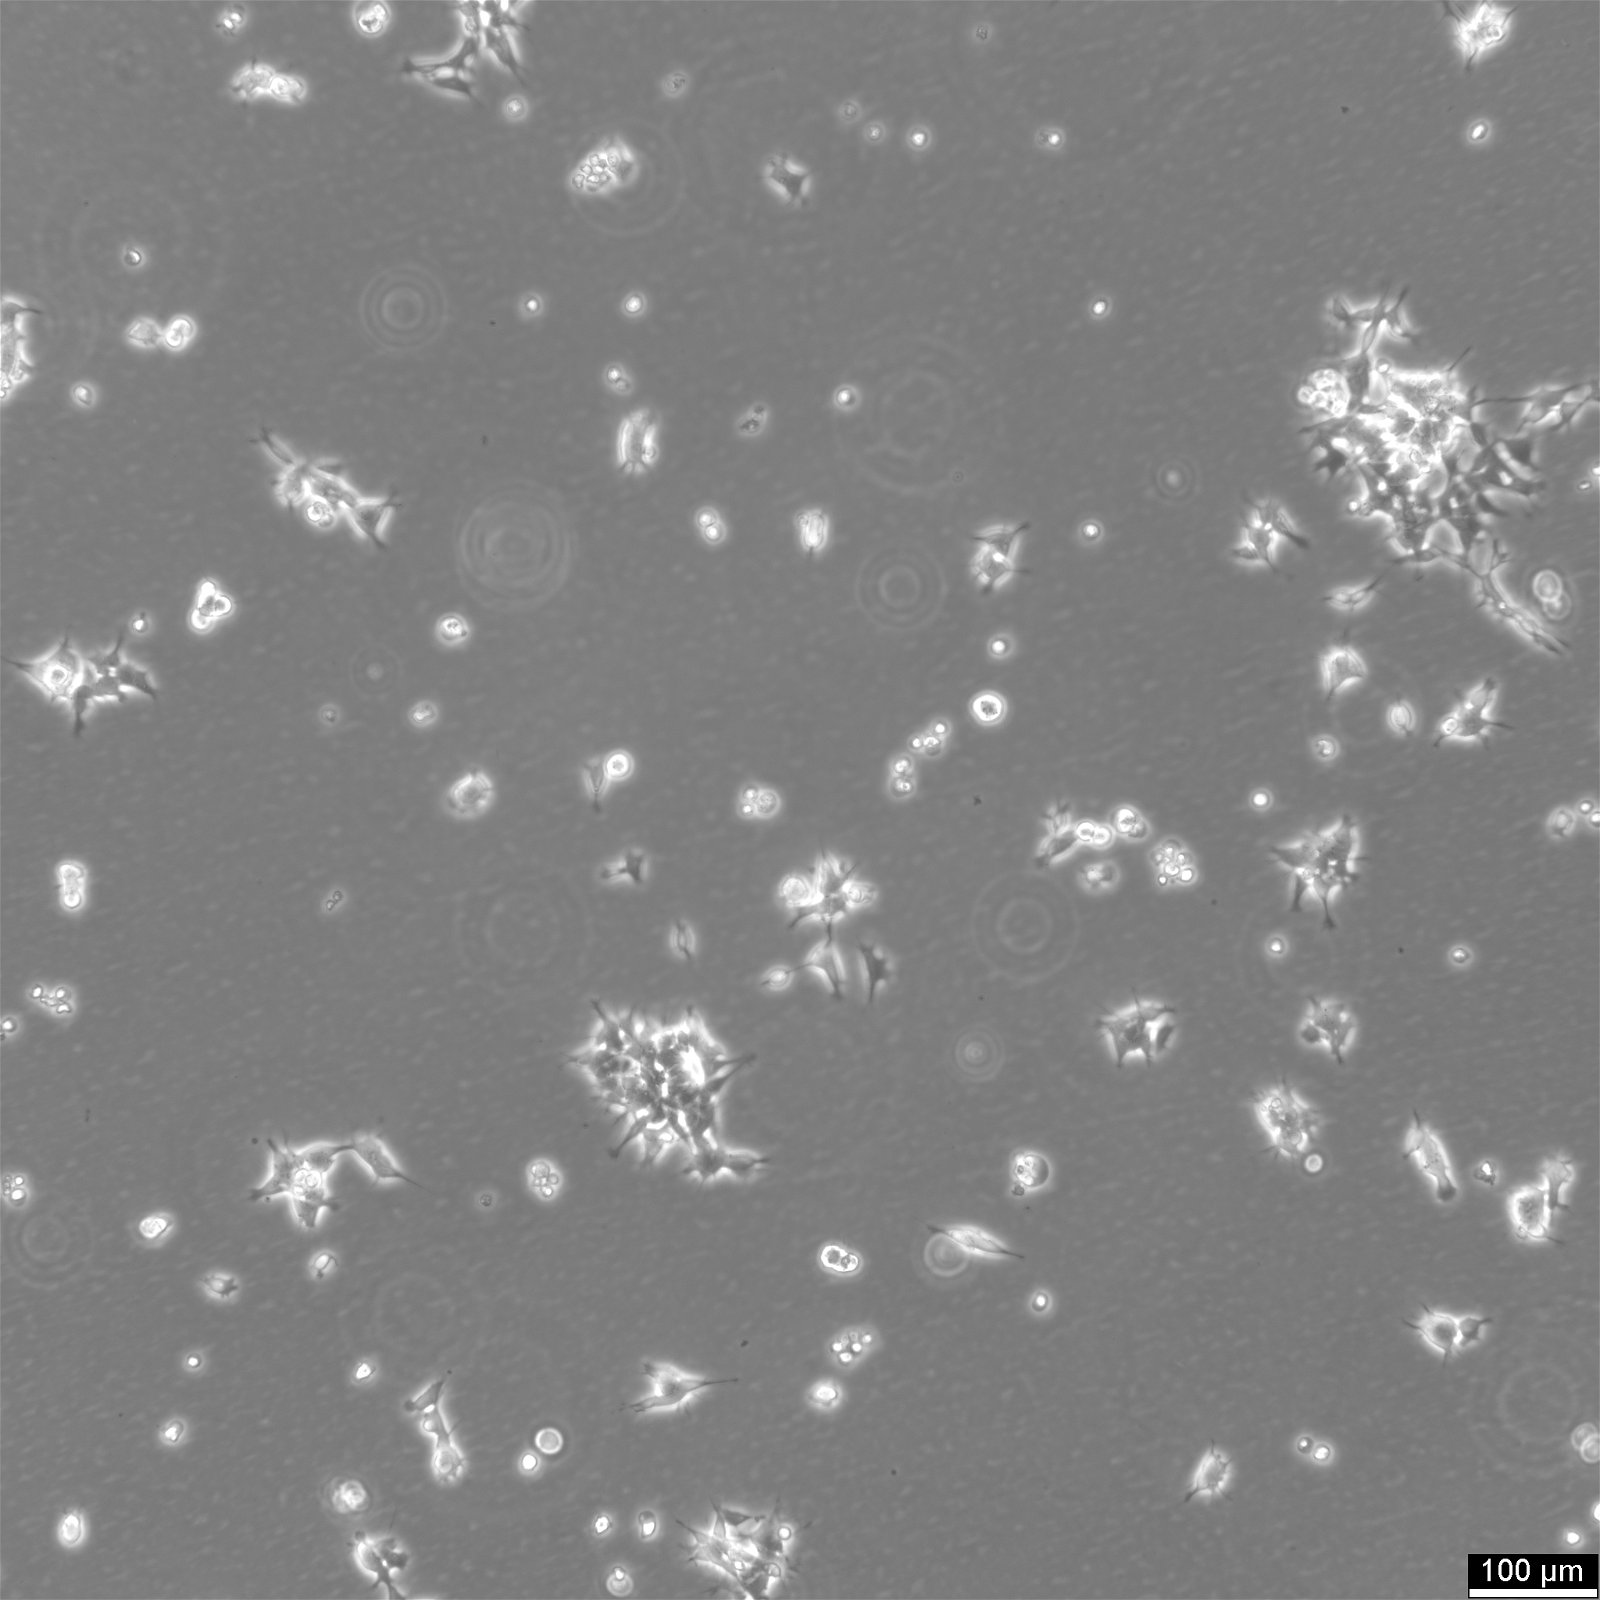 IMR-32 Cells